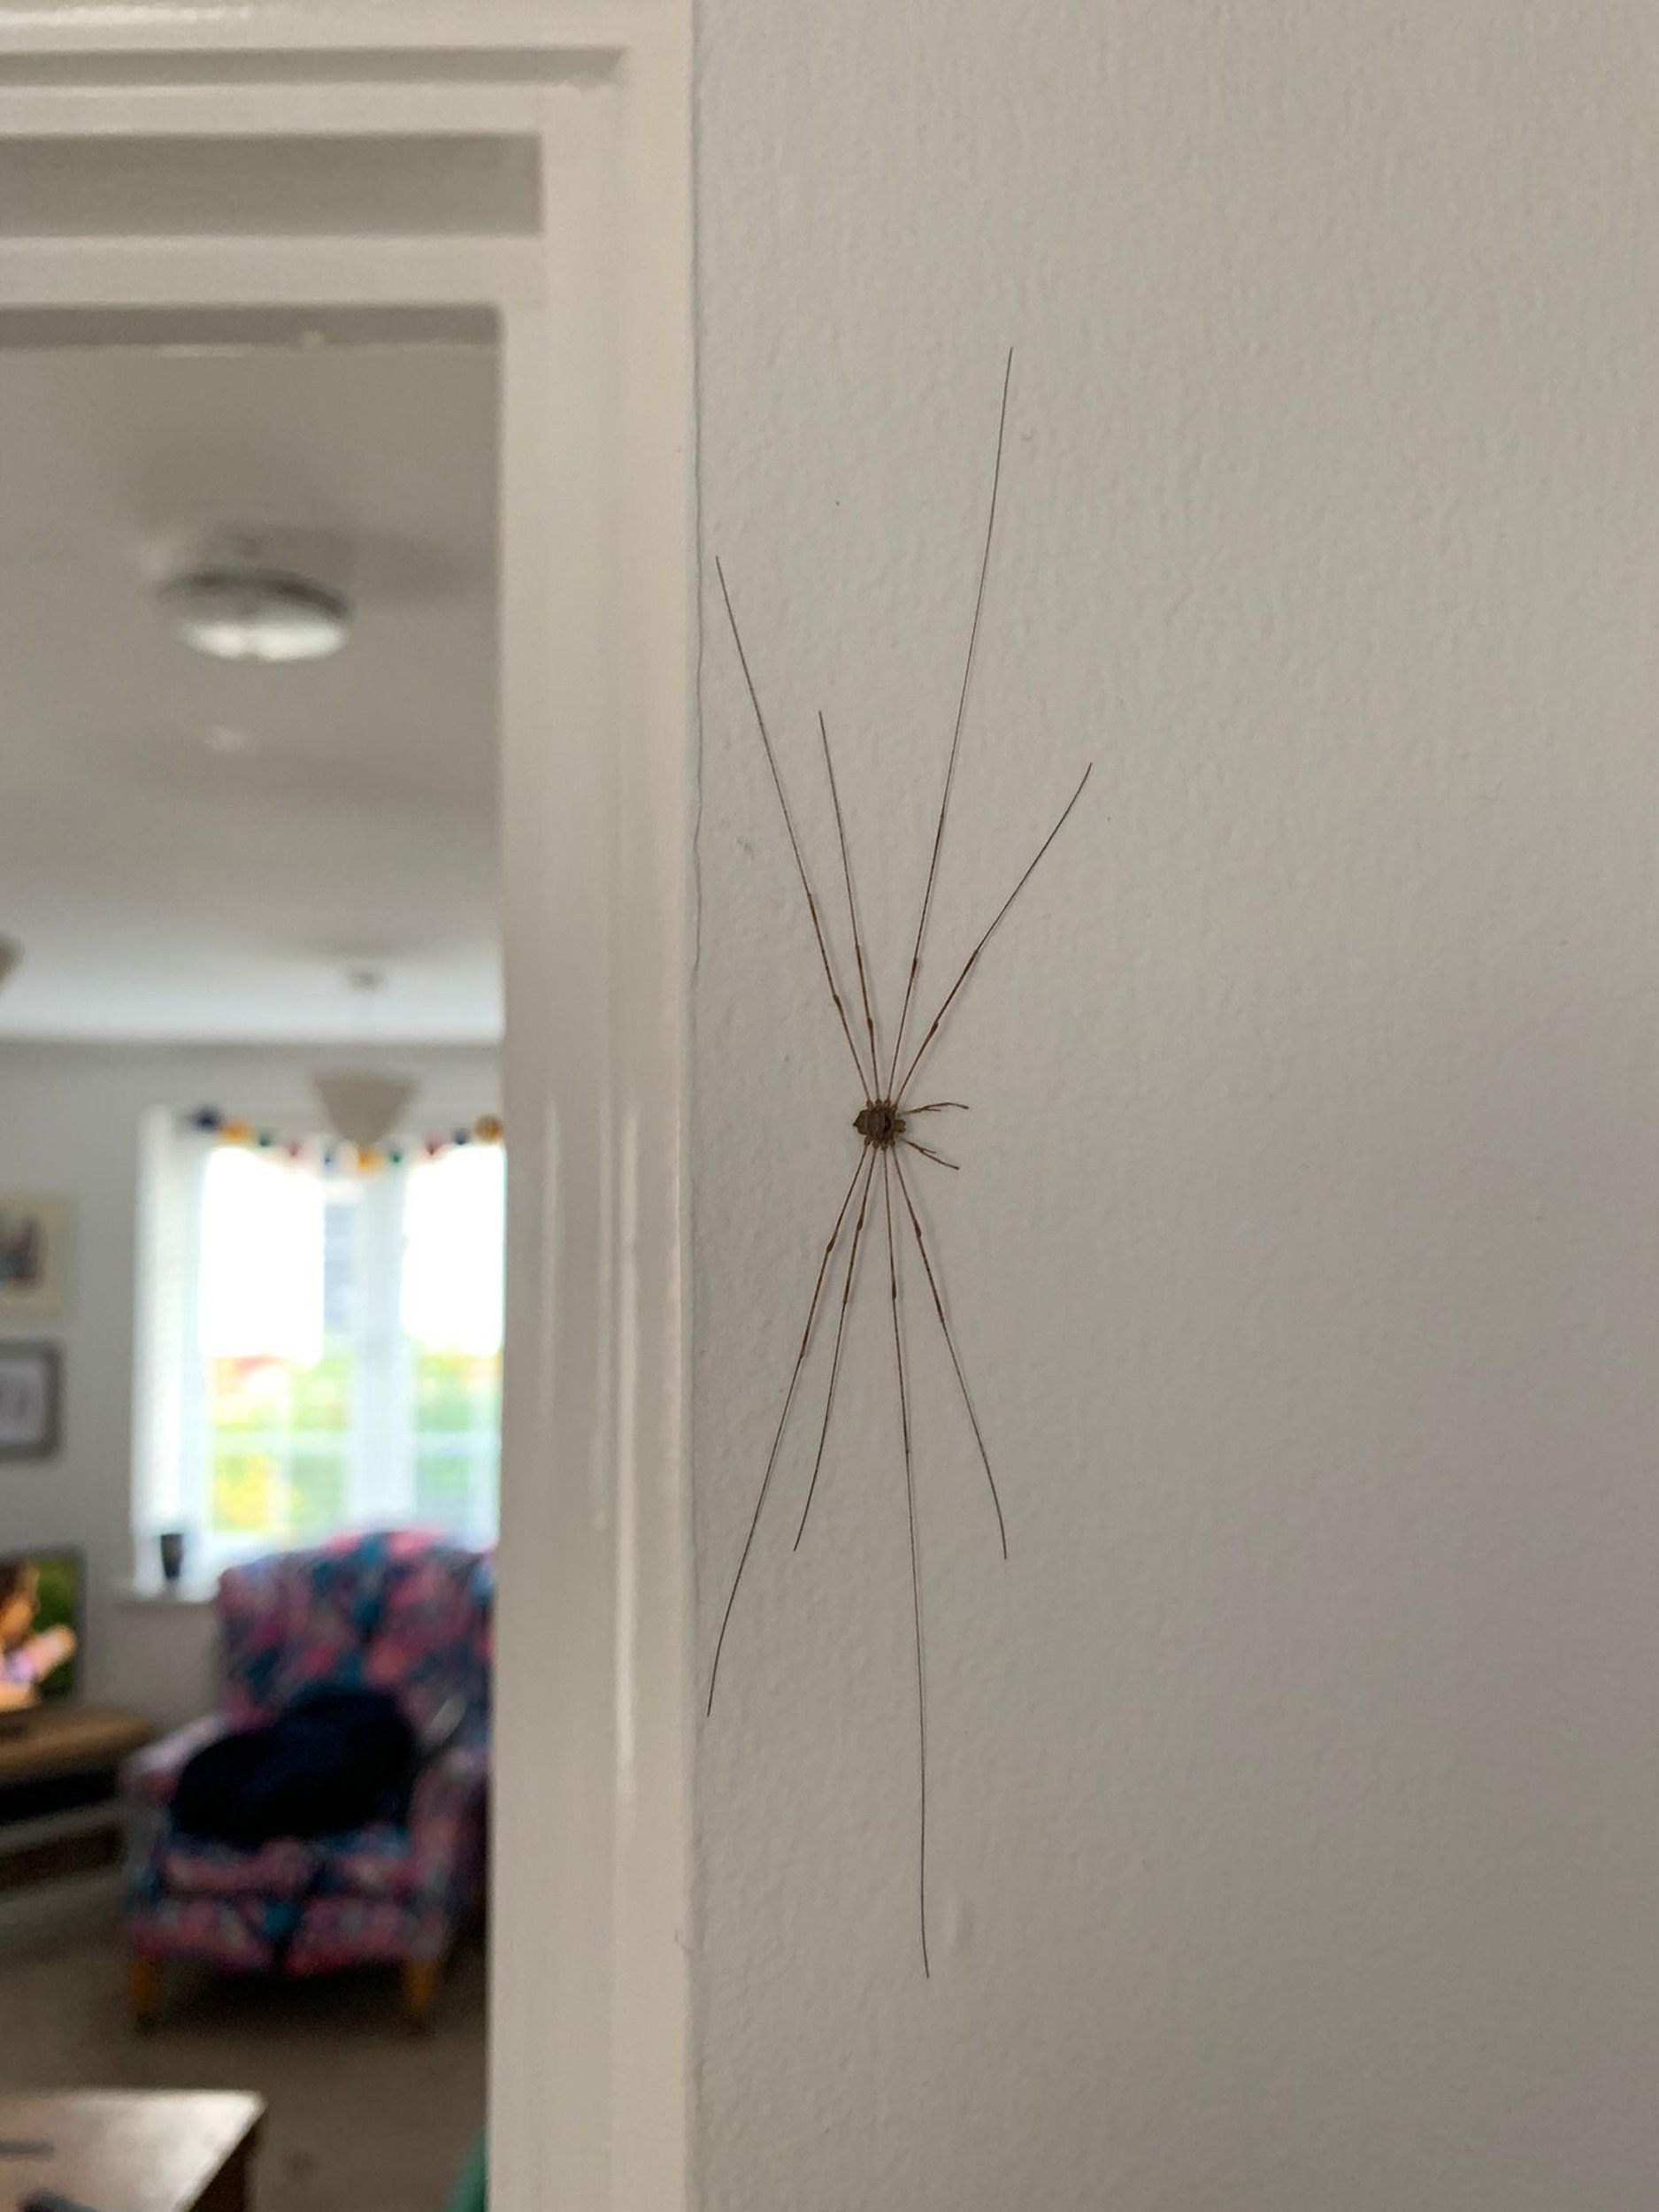 Alina, 25, got the fright of her life when she spotted a huge spider on her kitchen wall